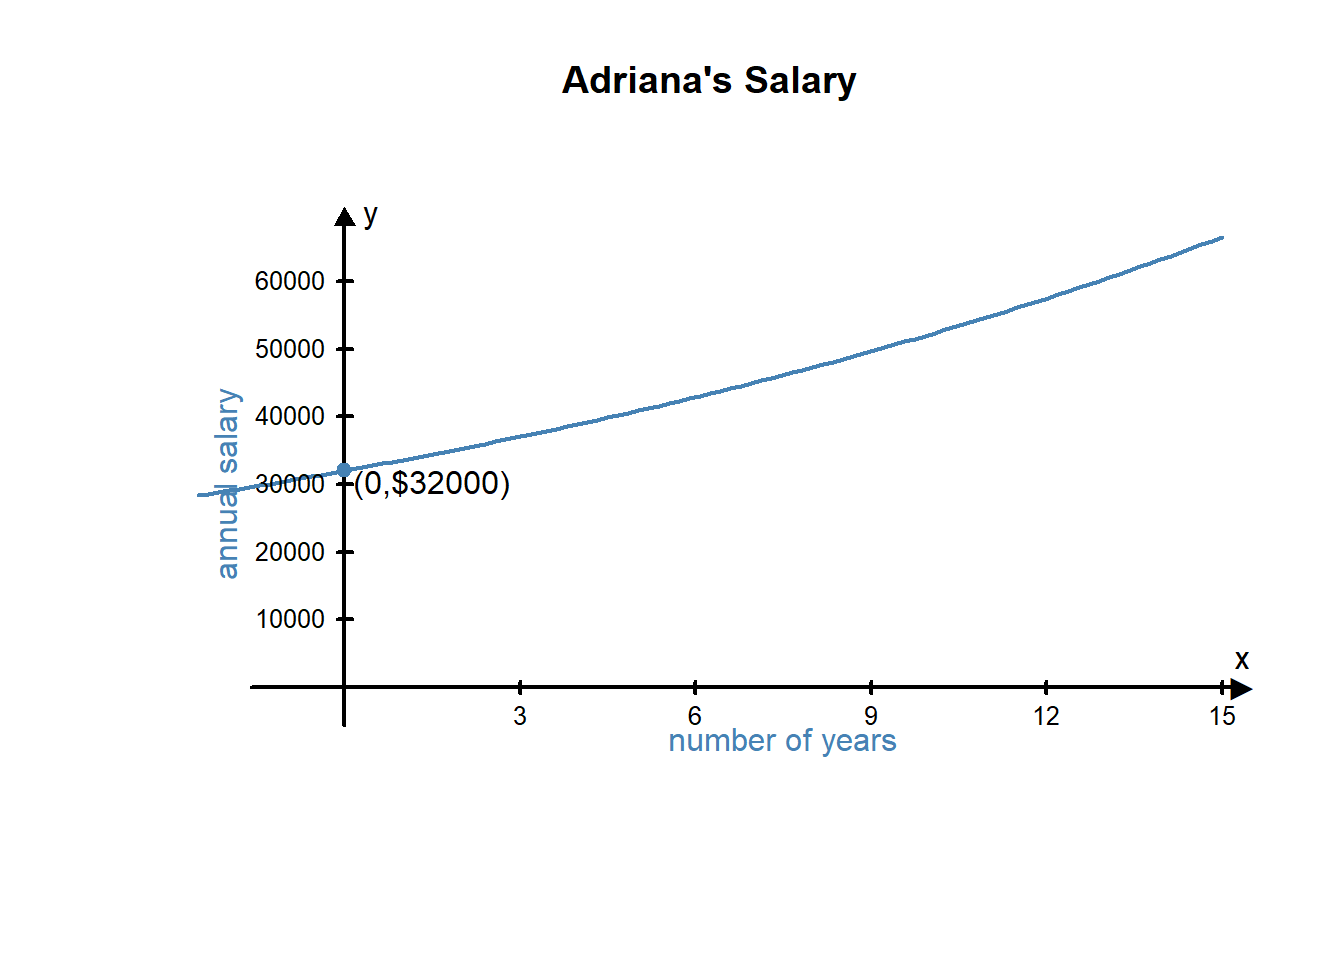 A graph showing Adriana's annual salary over the number of years she has worked at her job. Ariana at year 0 makes $32,000 and from year zero to six her payment steadily rises. However, at year six her salary takes a sharper incline.